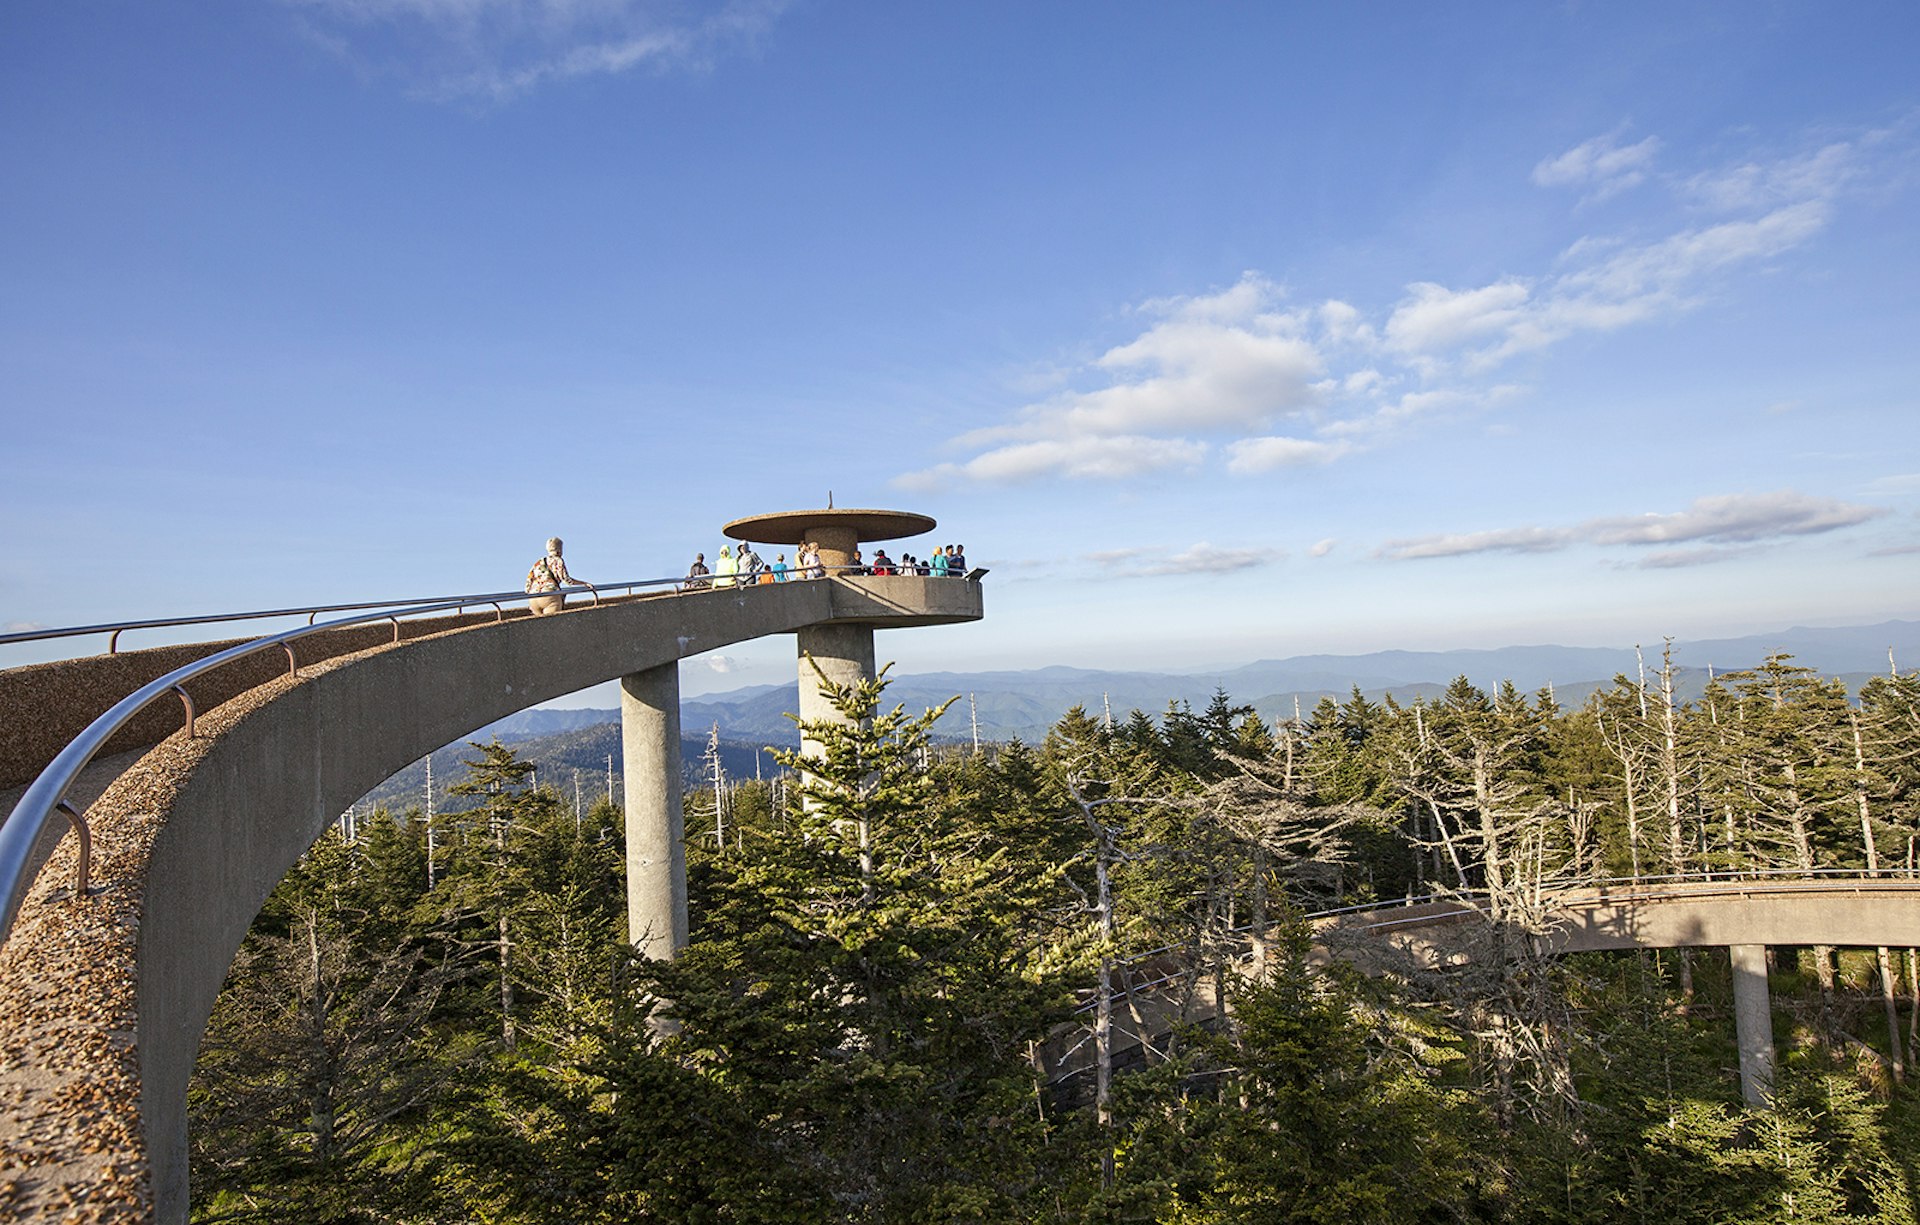 View of the concrete, arched path to Clingmans Dome, a popular lookout in Great Smoky Mountains National Park. Blue skies over pine trees © Ali Majdfar / Getty Images